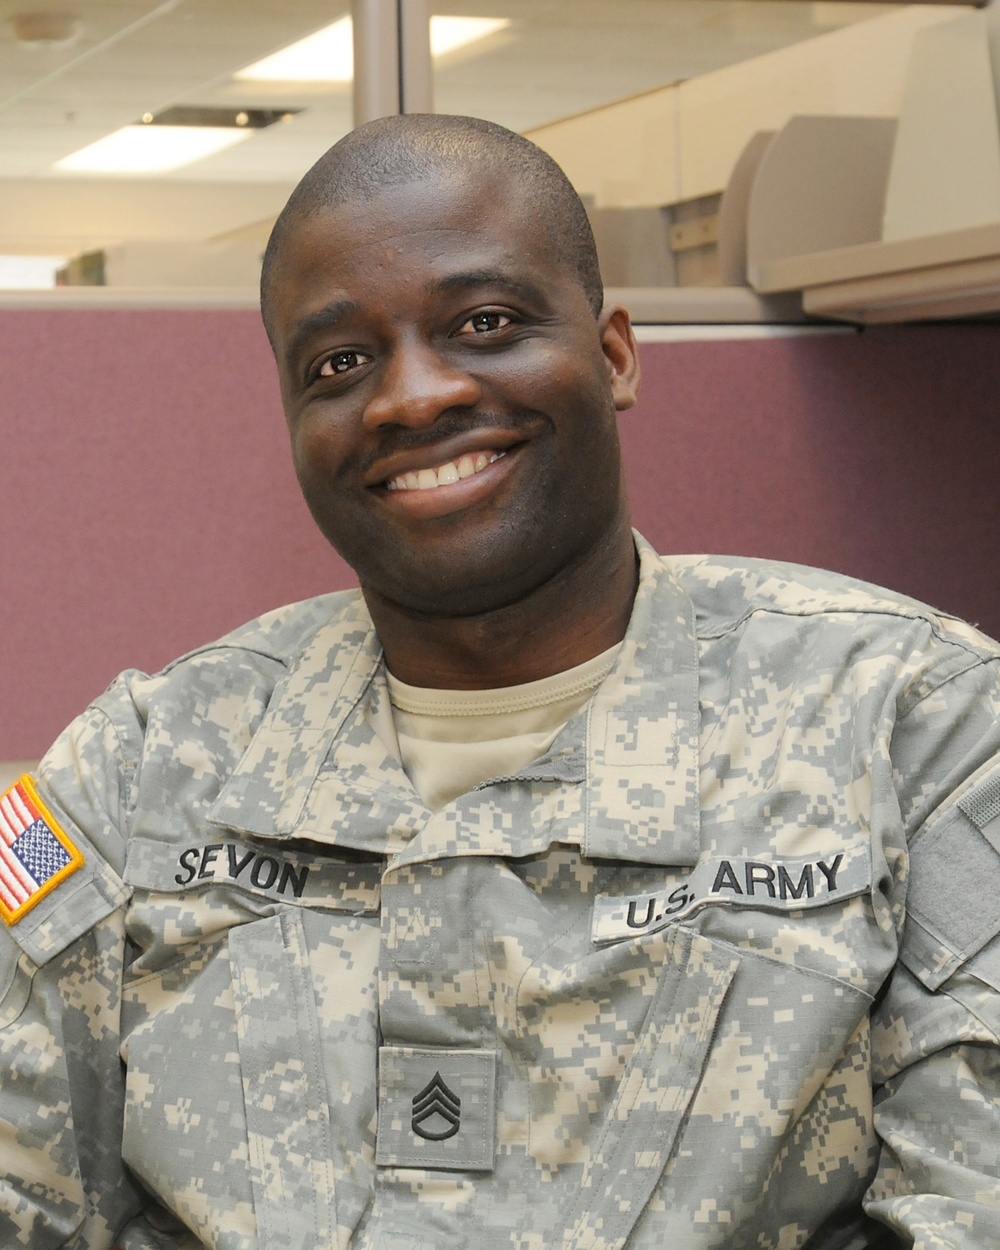 From Africa to America: Army Reserve soldier aims at goal to complete doctorate degree